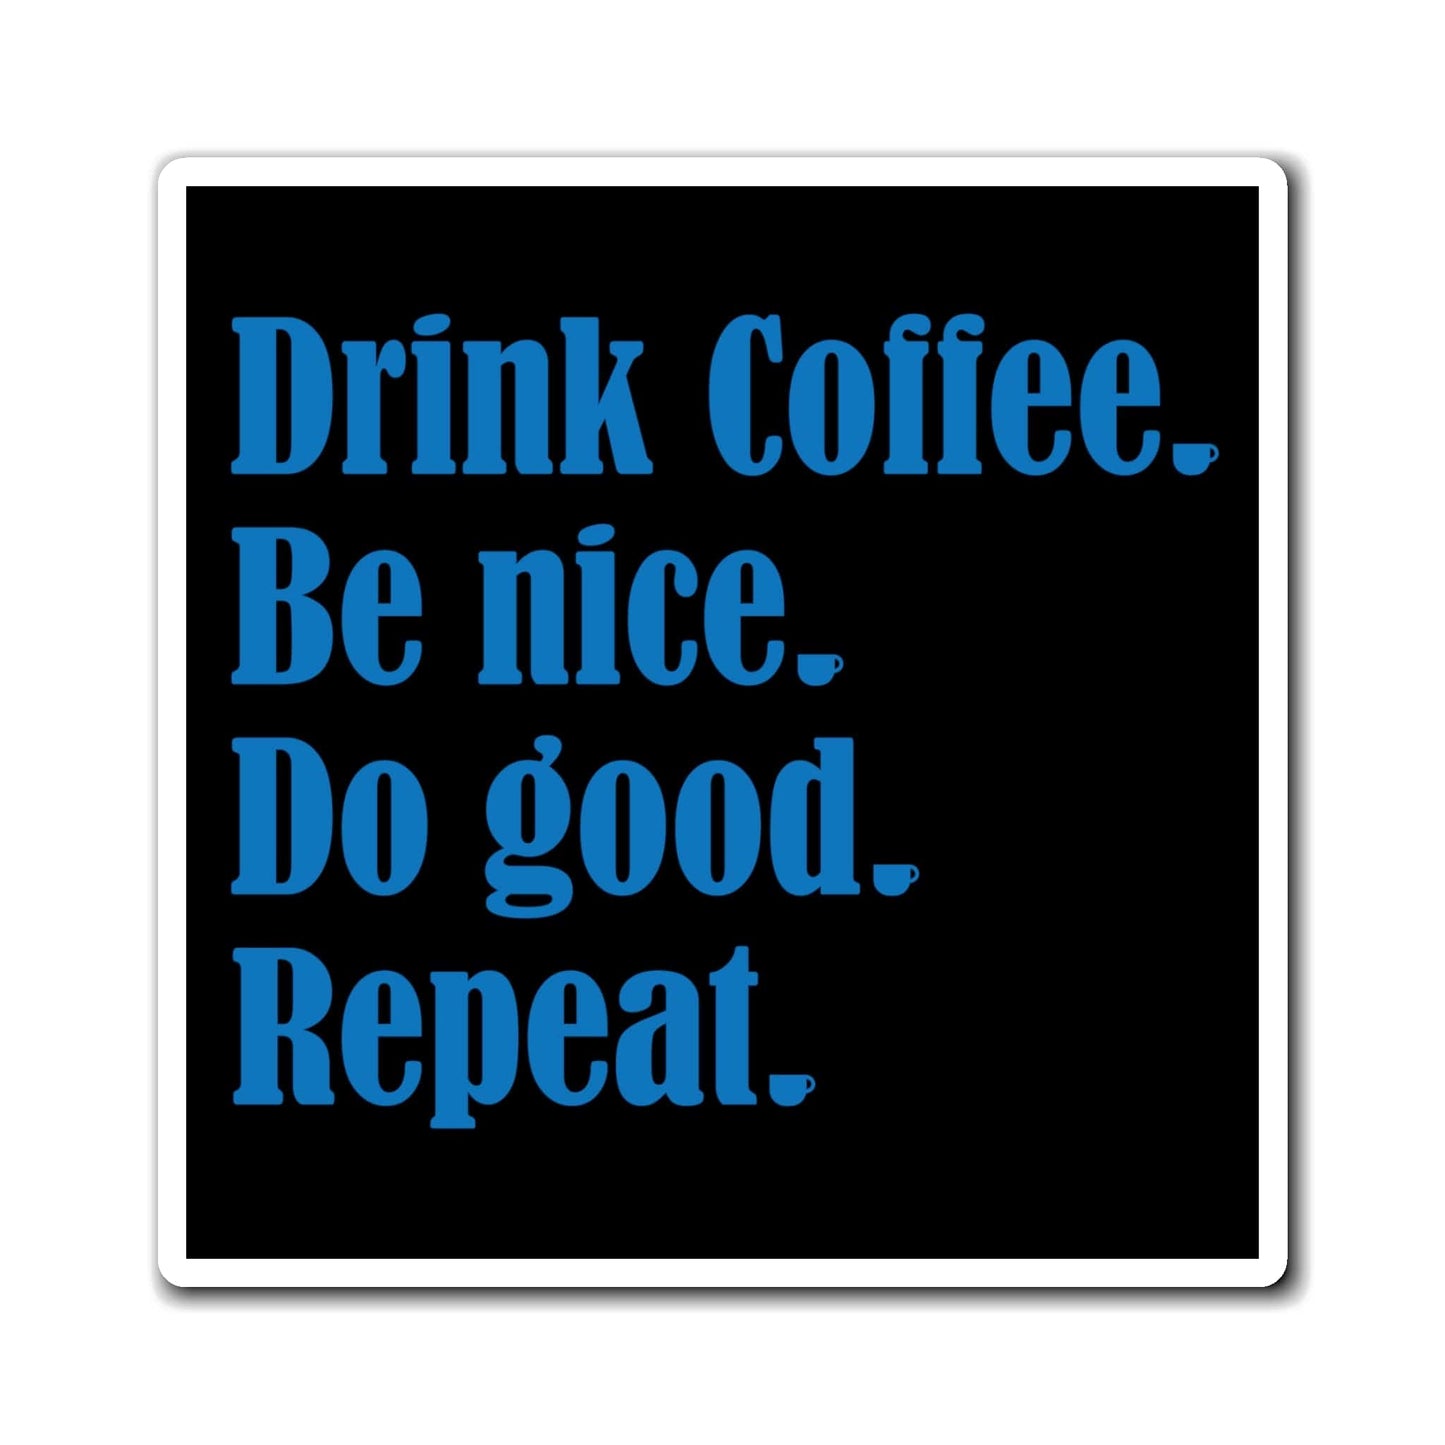 Good Bean Gifts "Drink Coffee, Be Nice, Do Good, Repeat" Magnets 6" × 6"